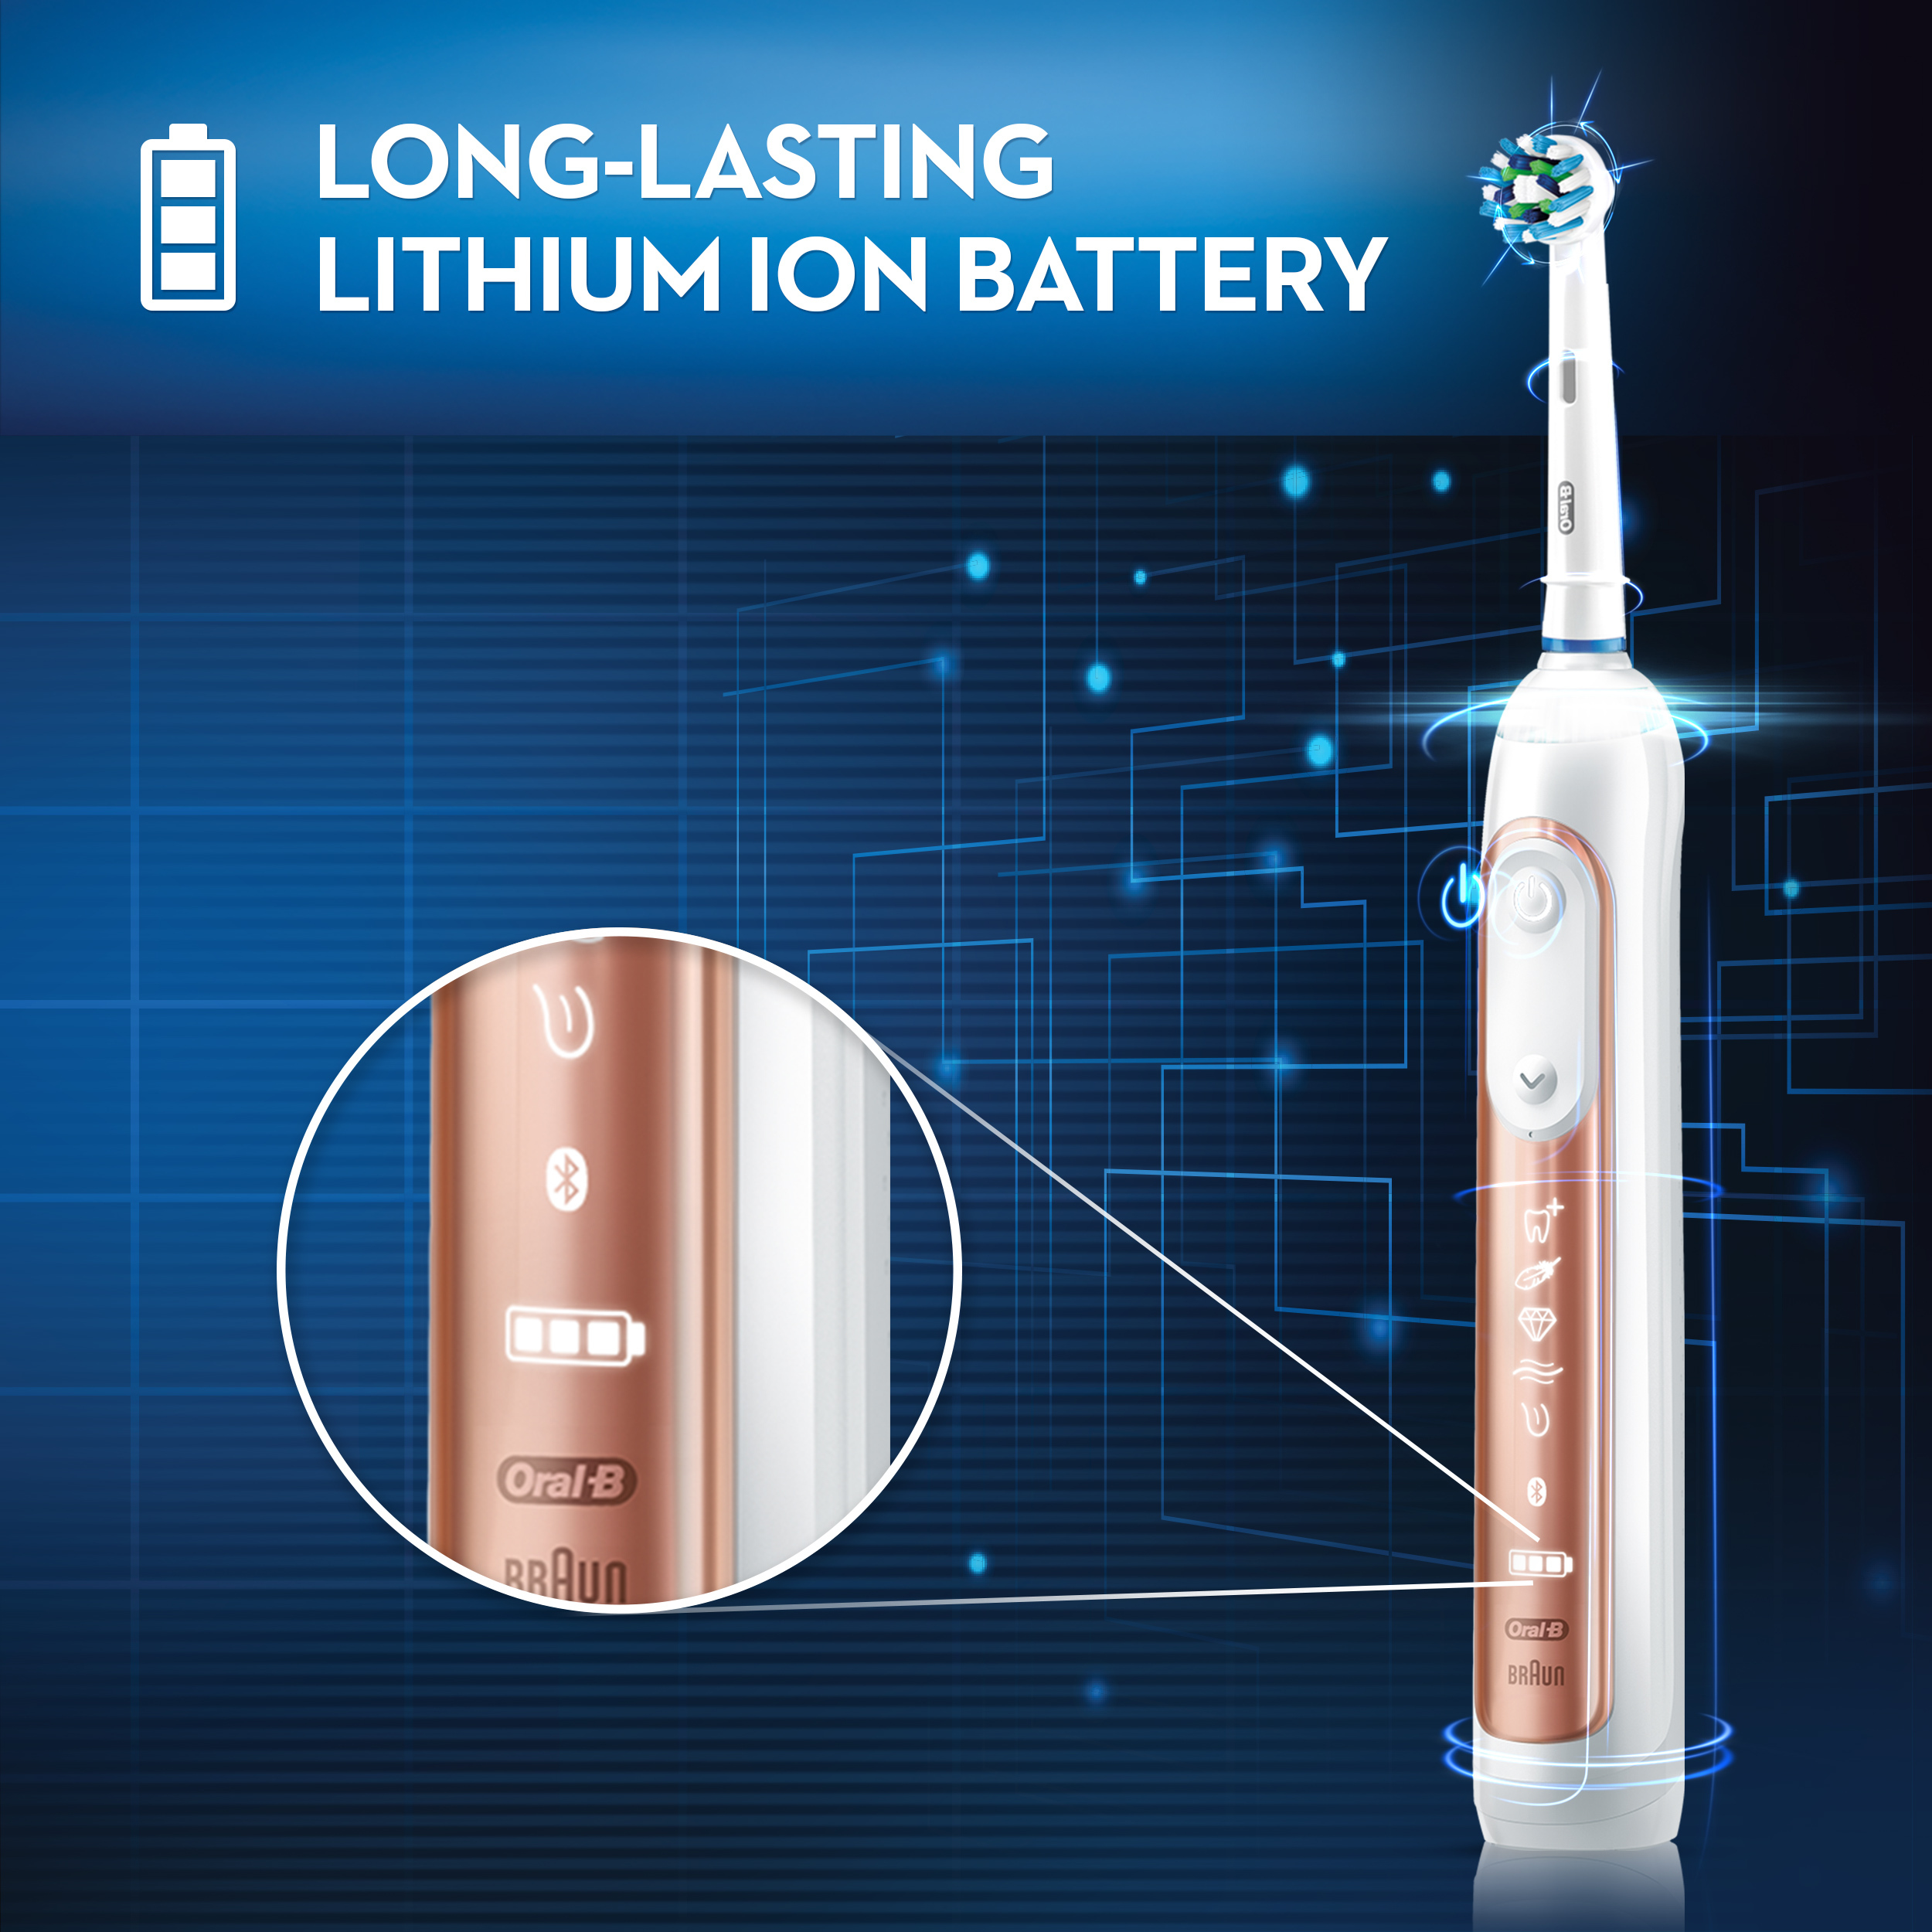 Oral-B Pro 7500 Power Rechargeable Electric Toothbrush, Rose Gold, Powered by Braun - image 3 of 11